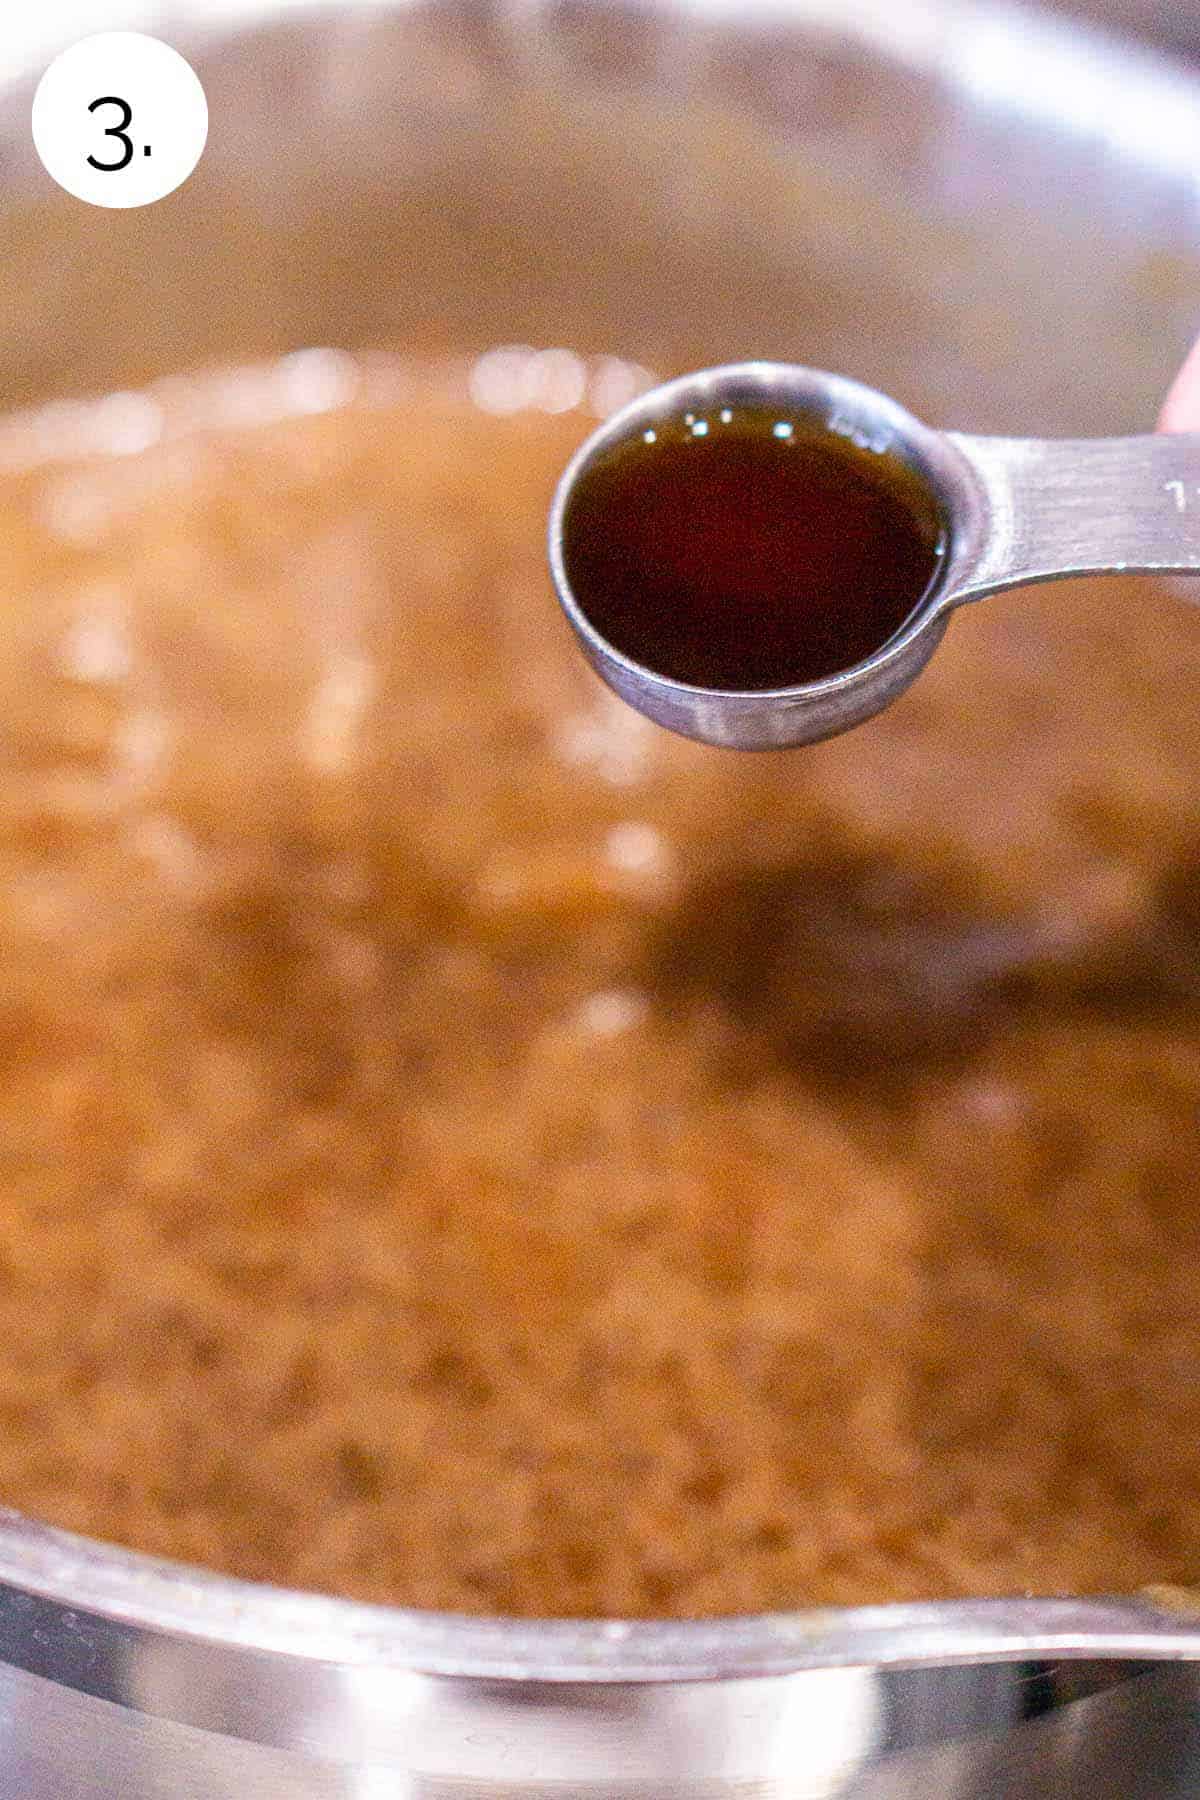 A teaspoon pouring the vanilla extract into the sauce after it had boiled and thickened.